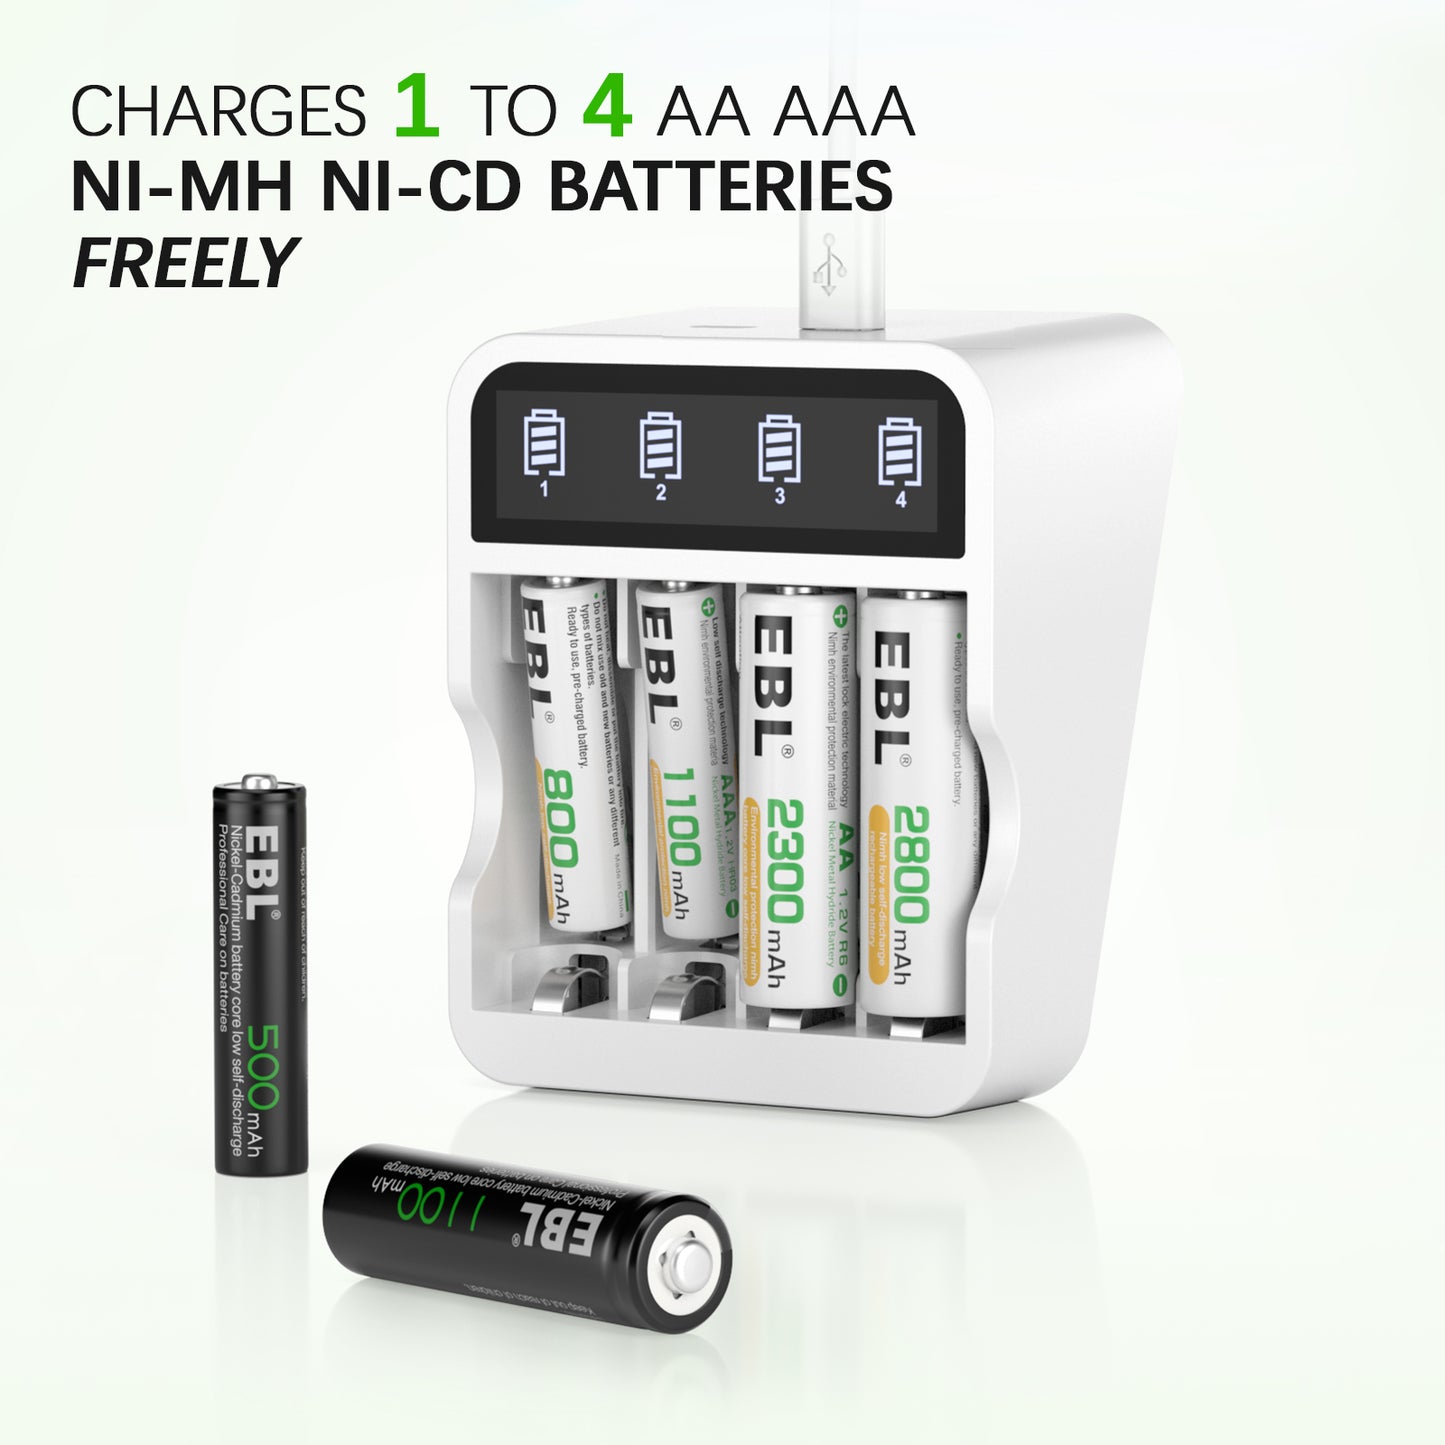 EBL TB-6408 Smart Battery Charger with 2A USB Quick Charging Port, LCD Status Display, and Individually Controlled Ports for AA AAA Ni-MH Ni-CD Rechargeable Batteries